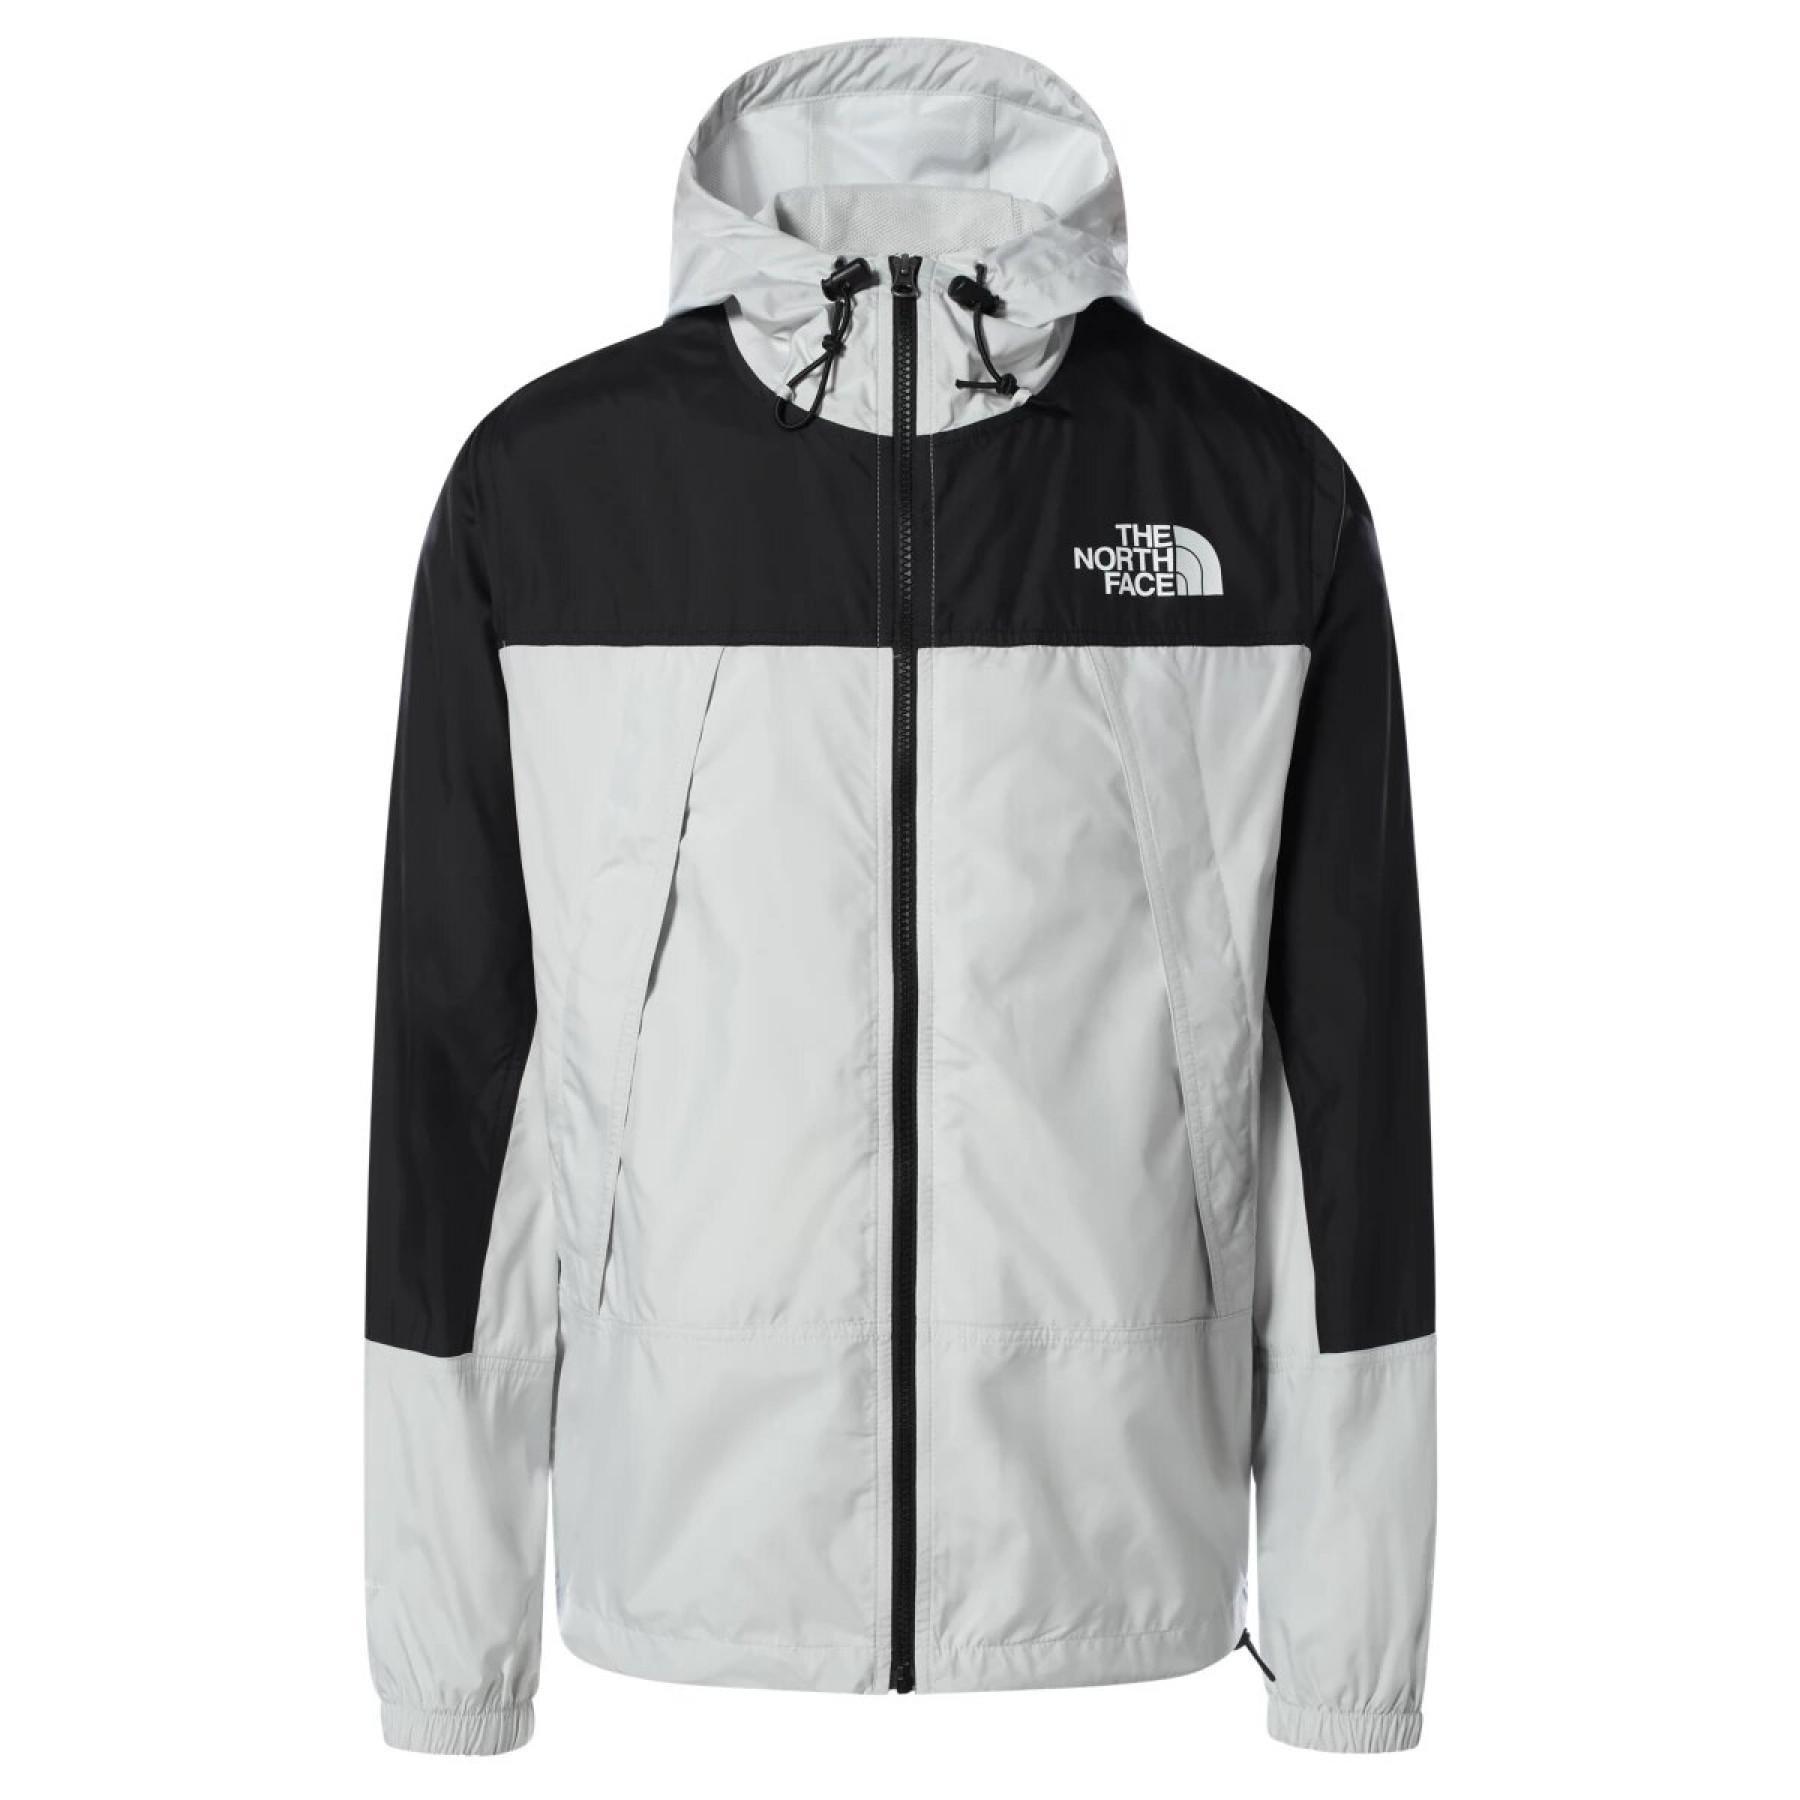 Windproof jacket The North Face Hydrenaline